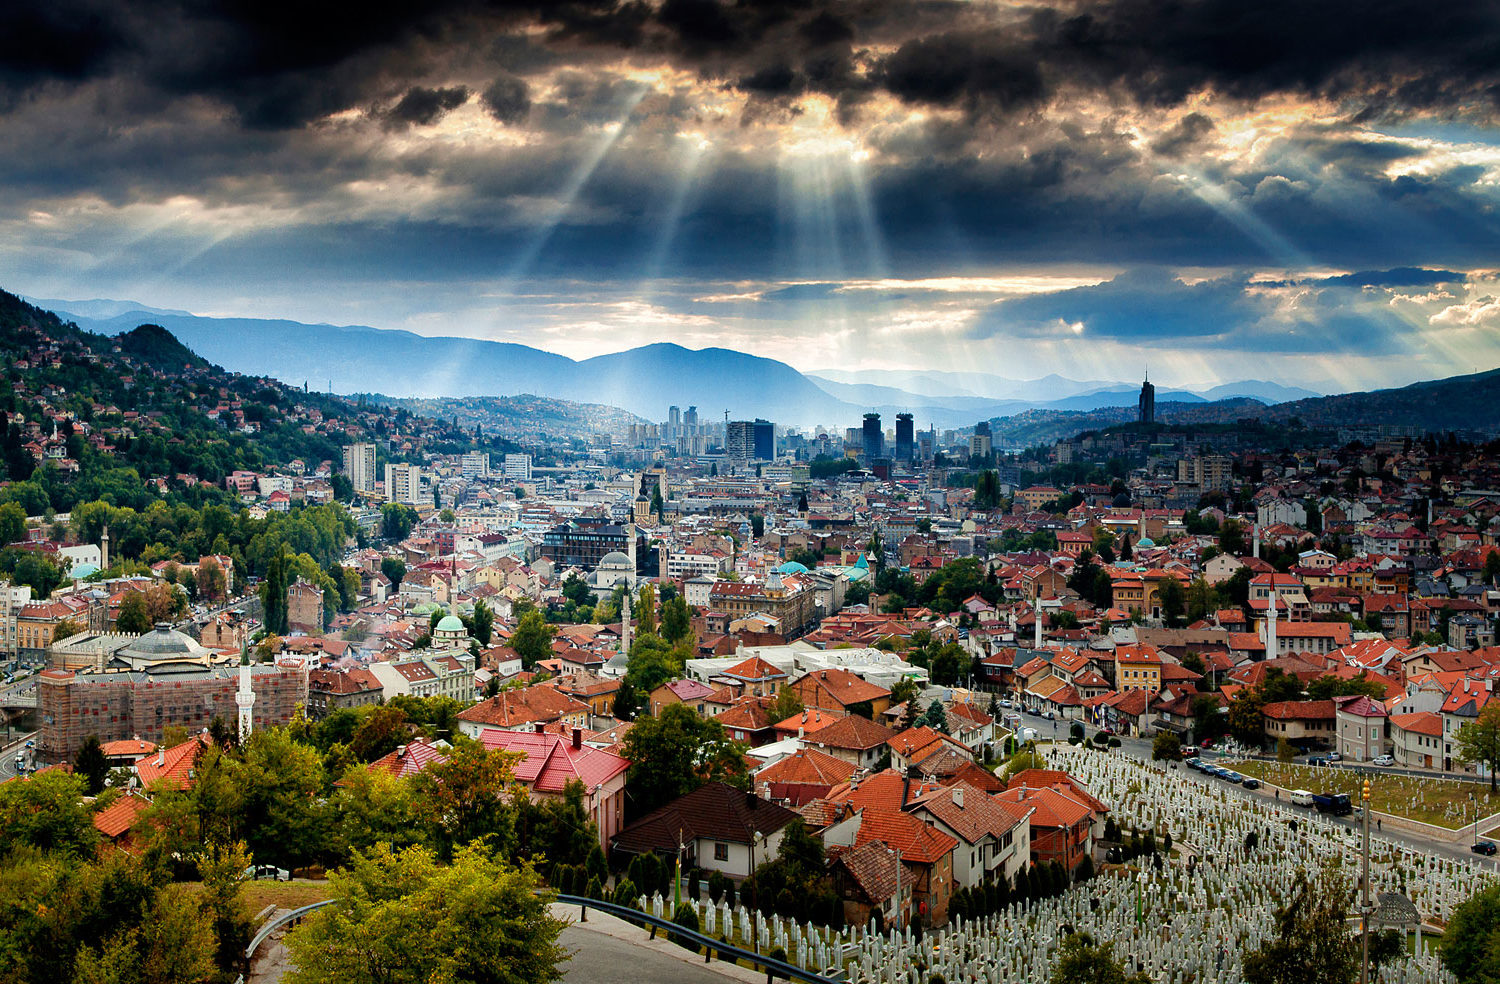 Panoramic view of Sarajevo city from a high vantage point, showcasing the city's dense architecture, surrounding mountains, and dramatic clouds with sun rays breaking through.